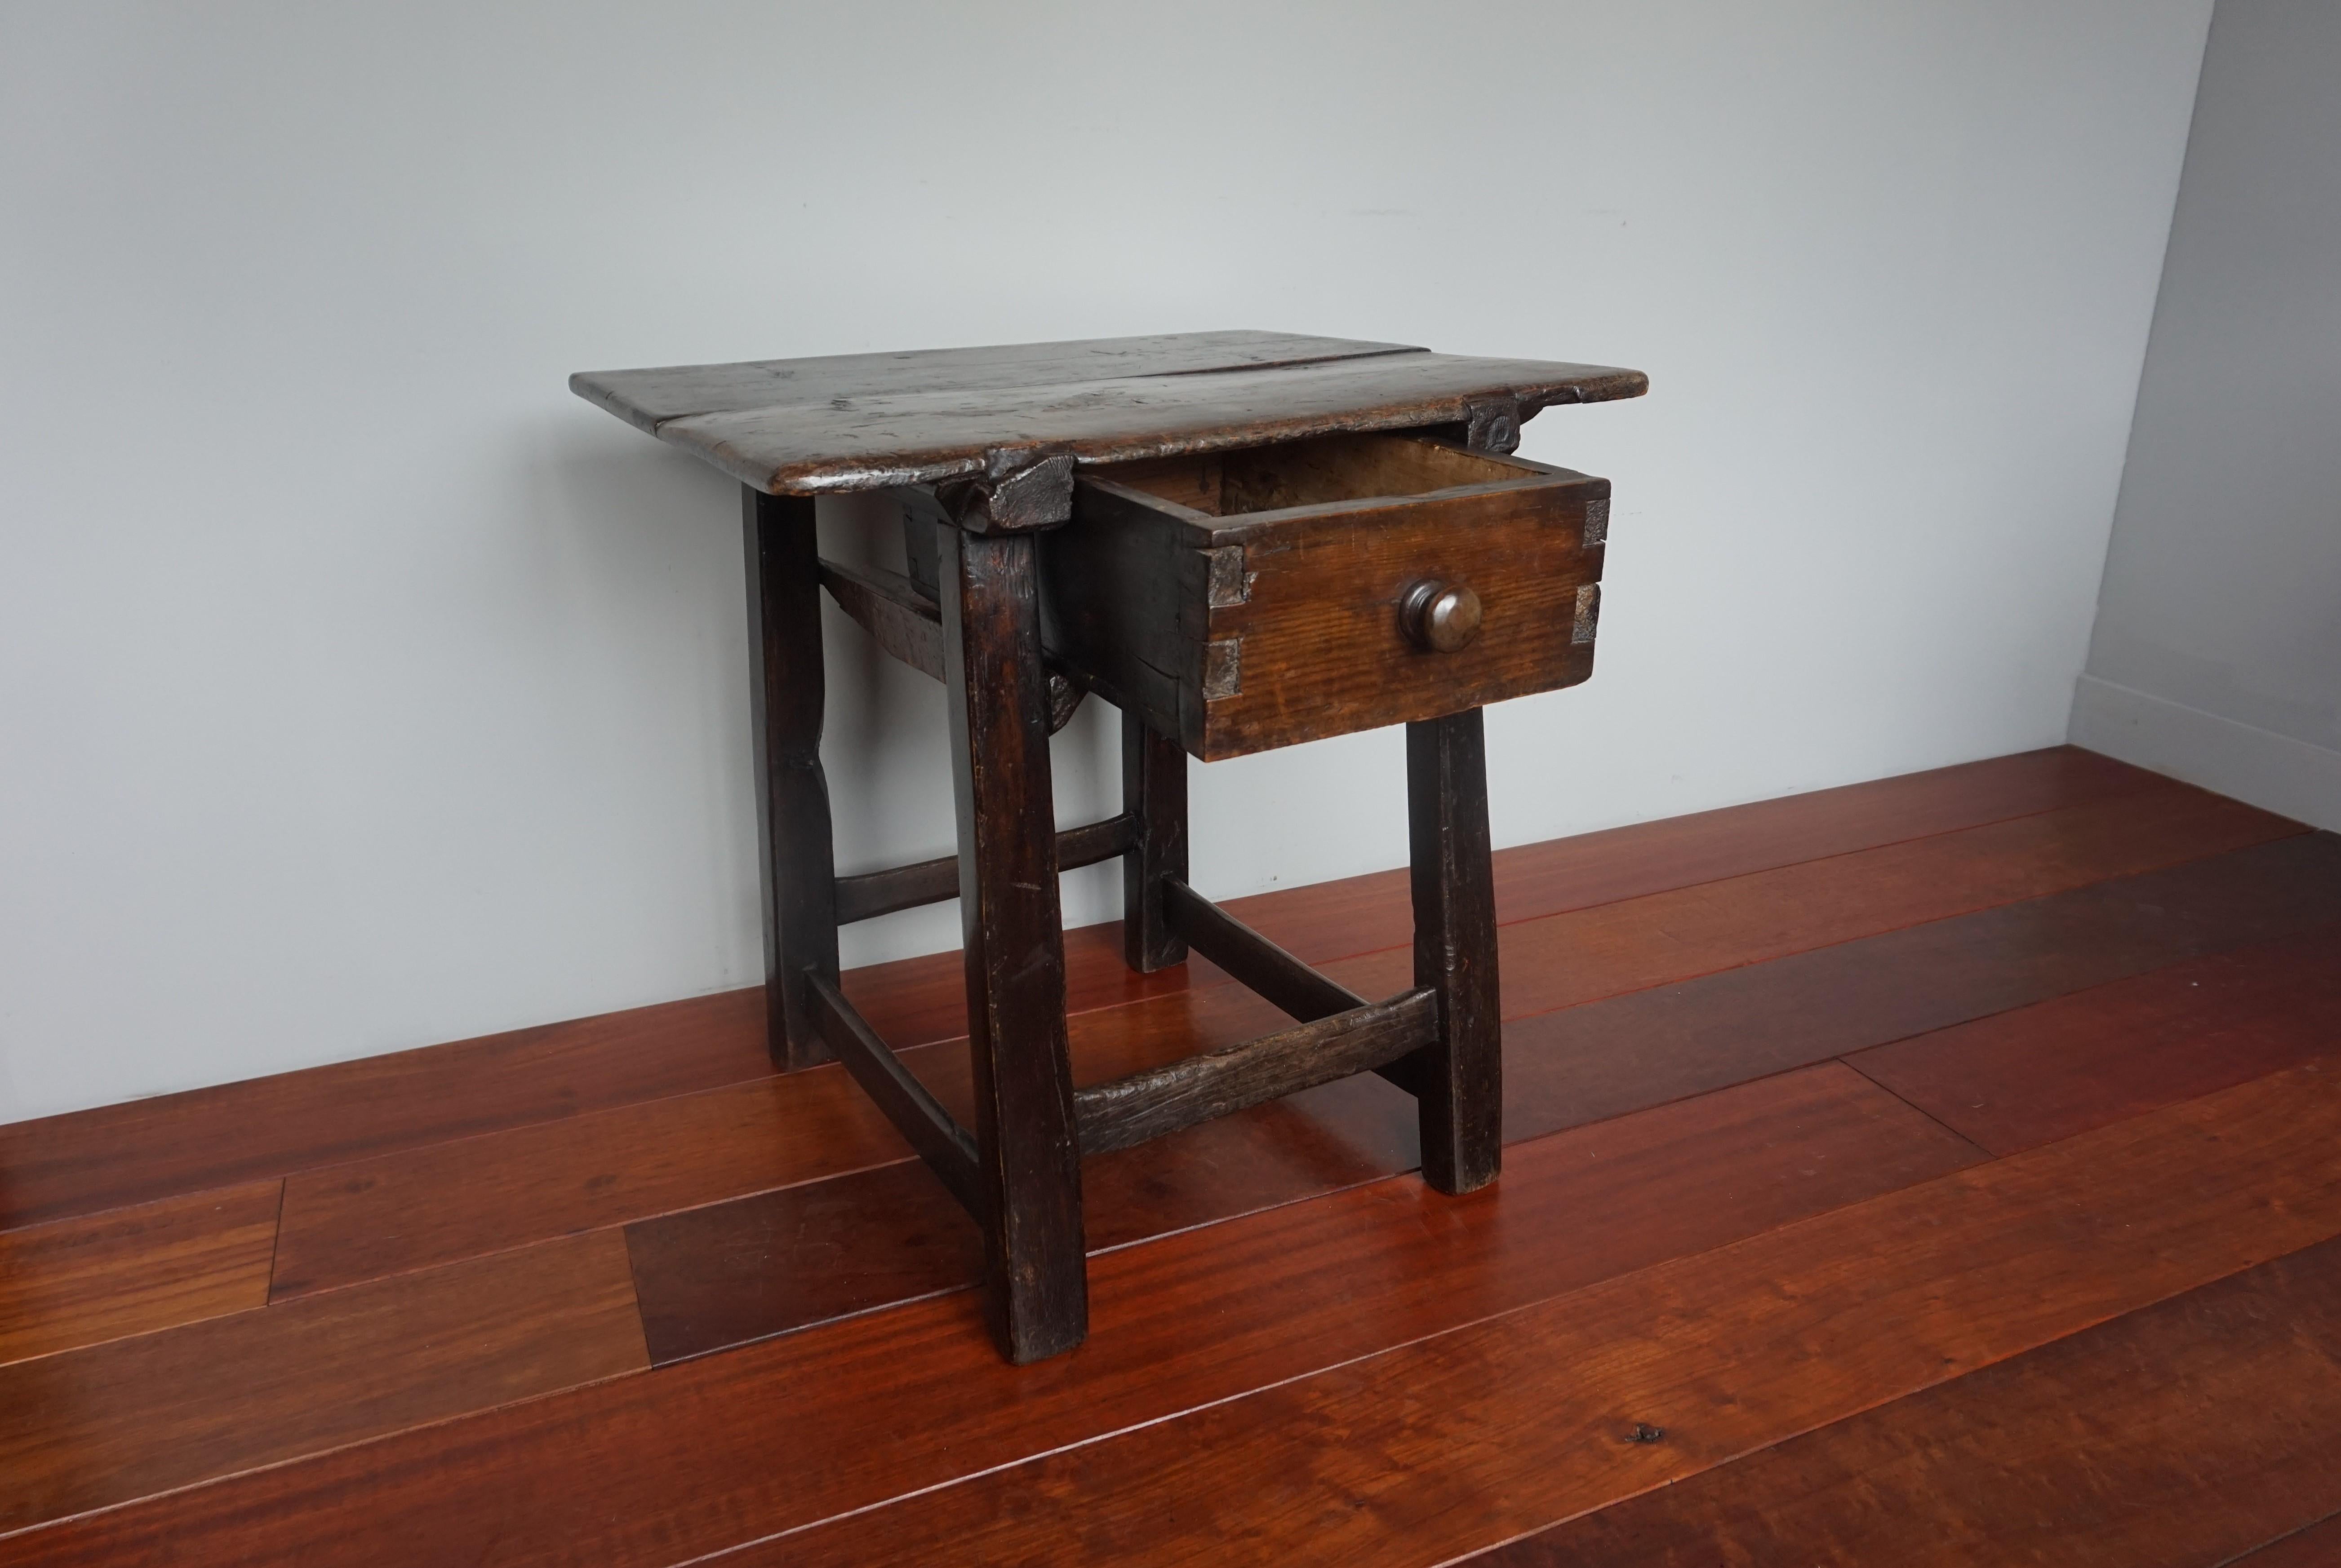 Antique and Rustic Early 1700s Wooden Spanish Countryside Pay Table with Drawer 7